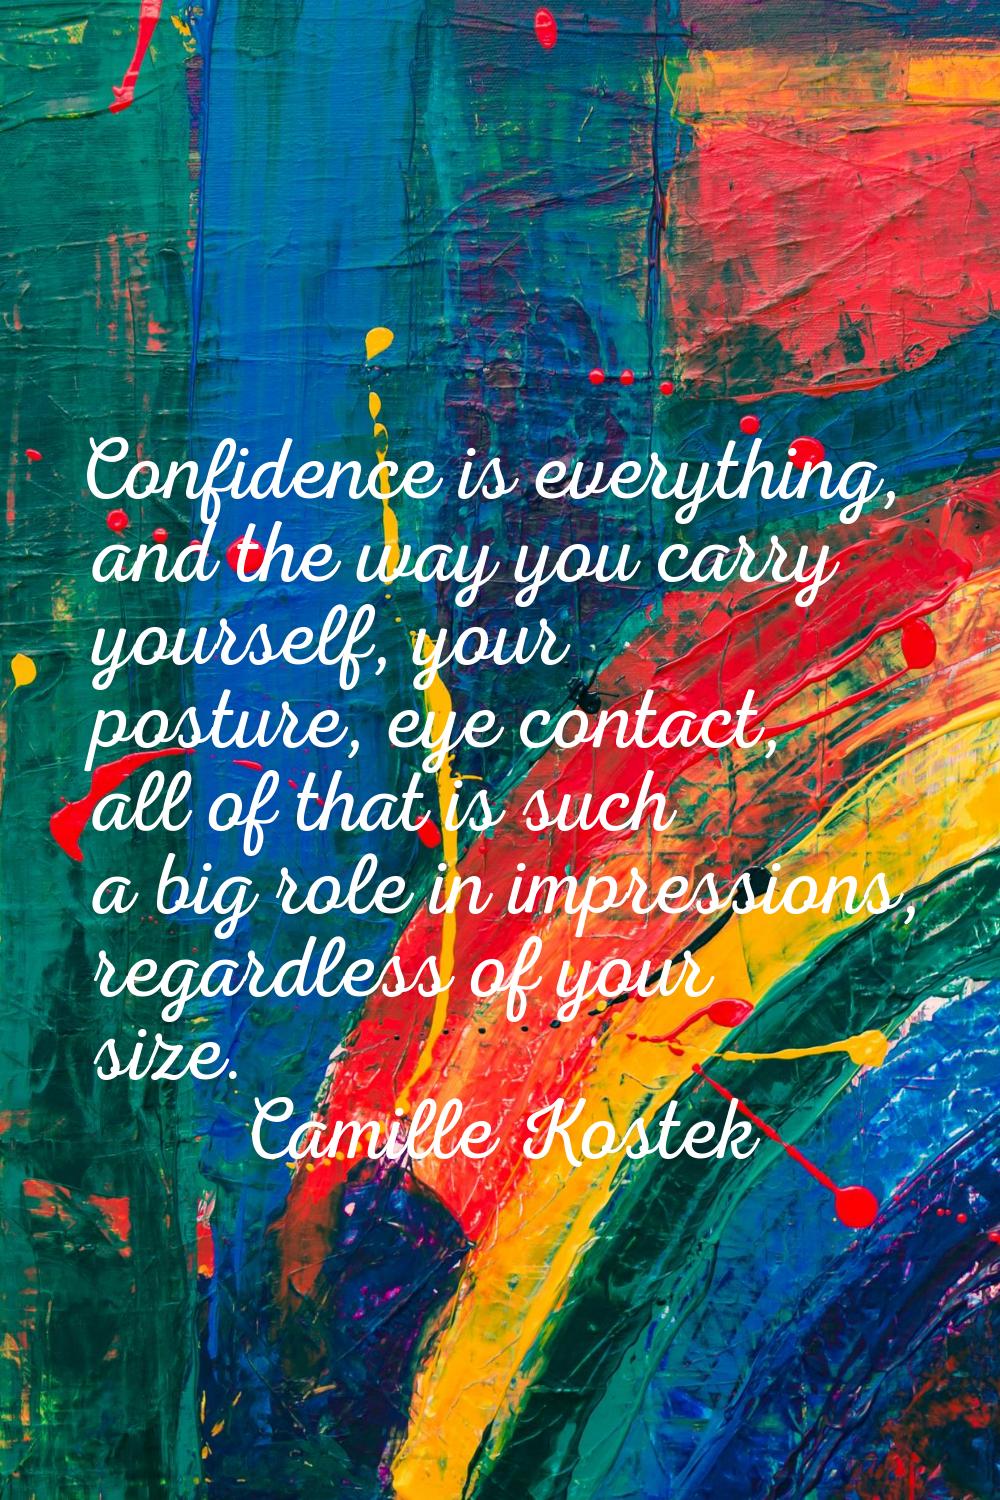 Confidence is everything, and the way you carry yourself, your posture, eye contact, all of that is